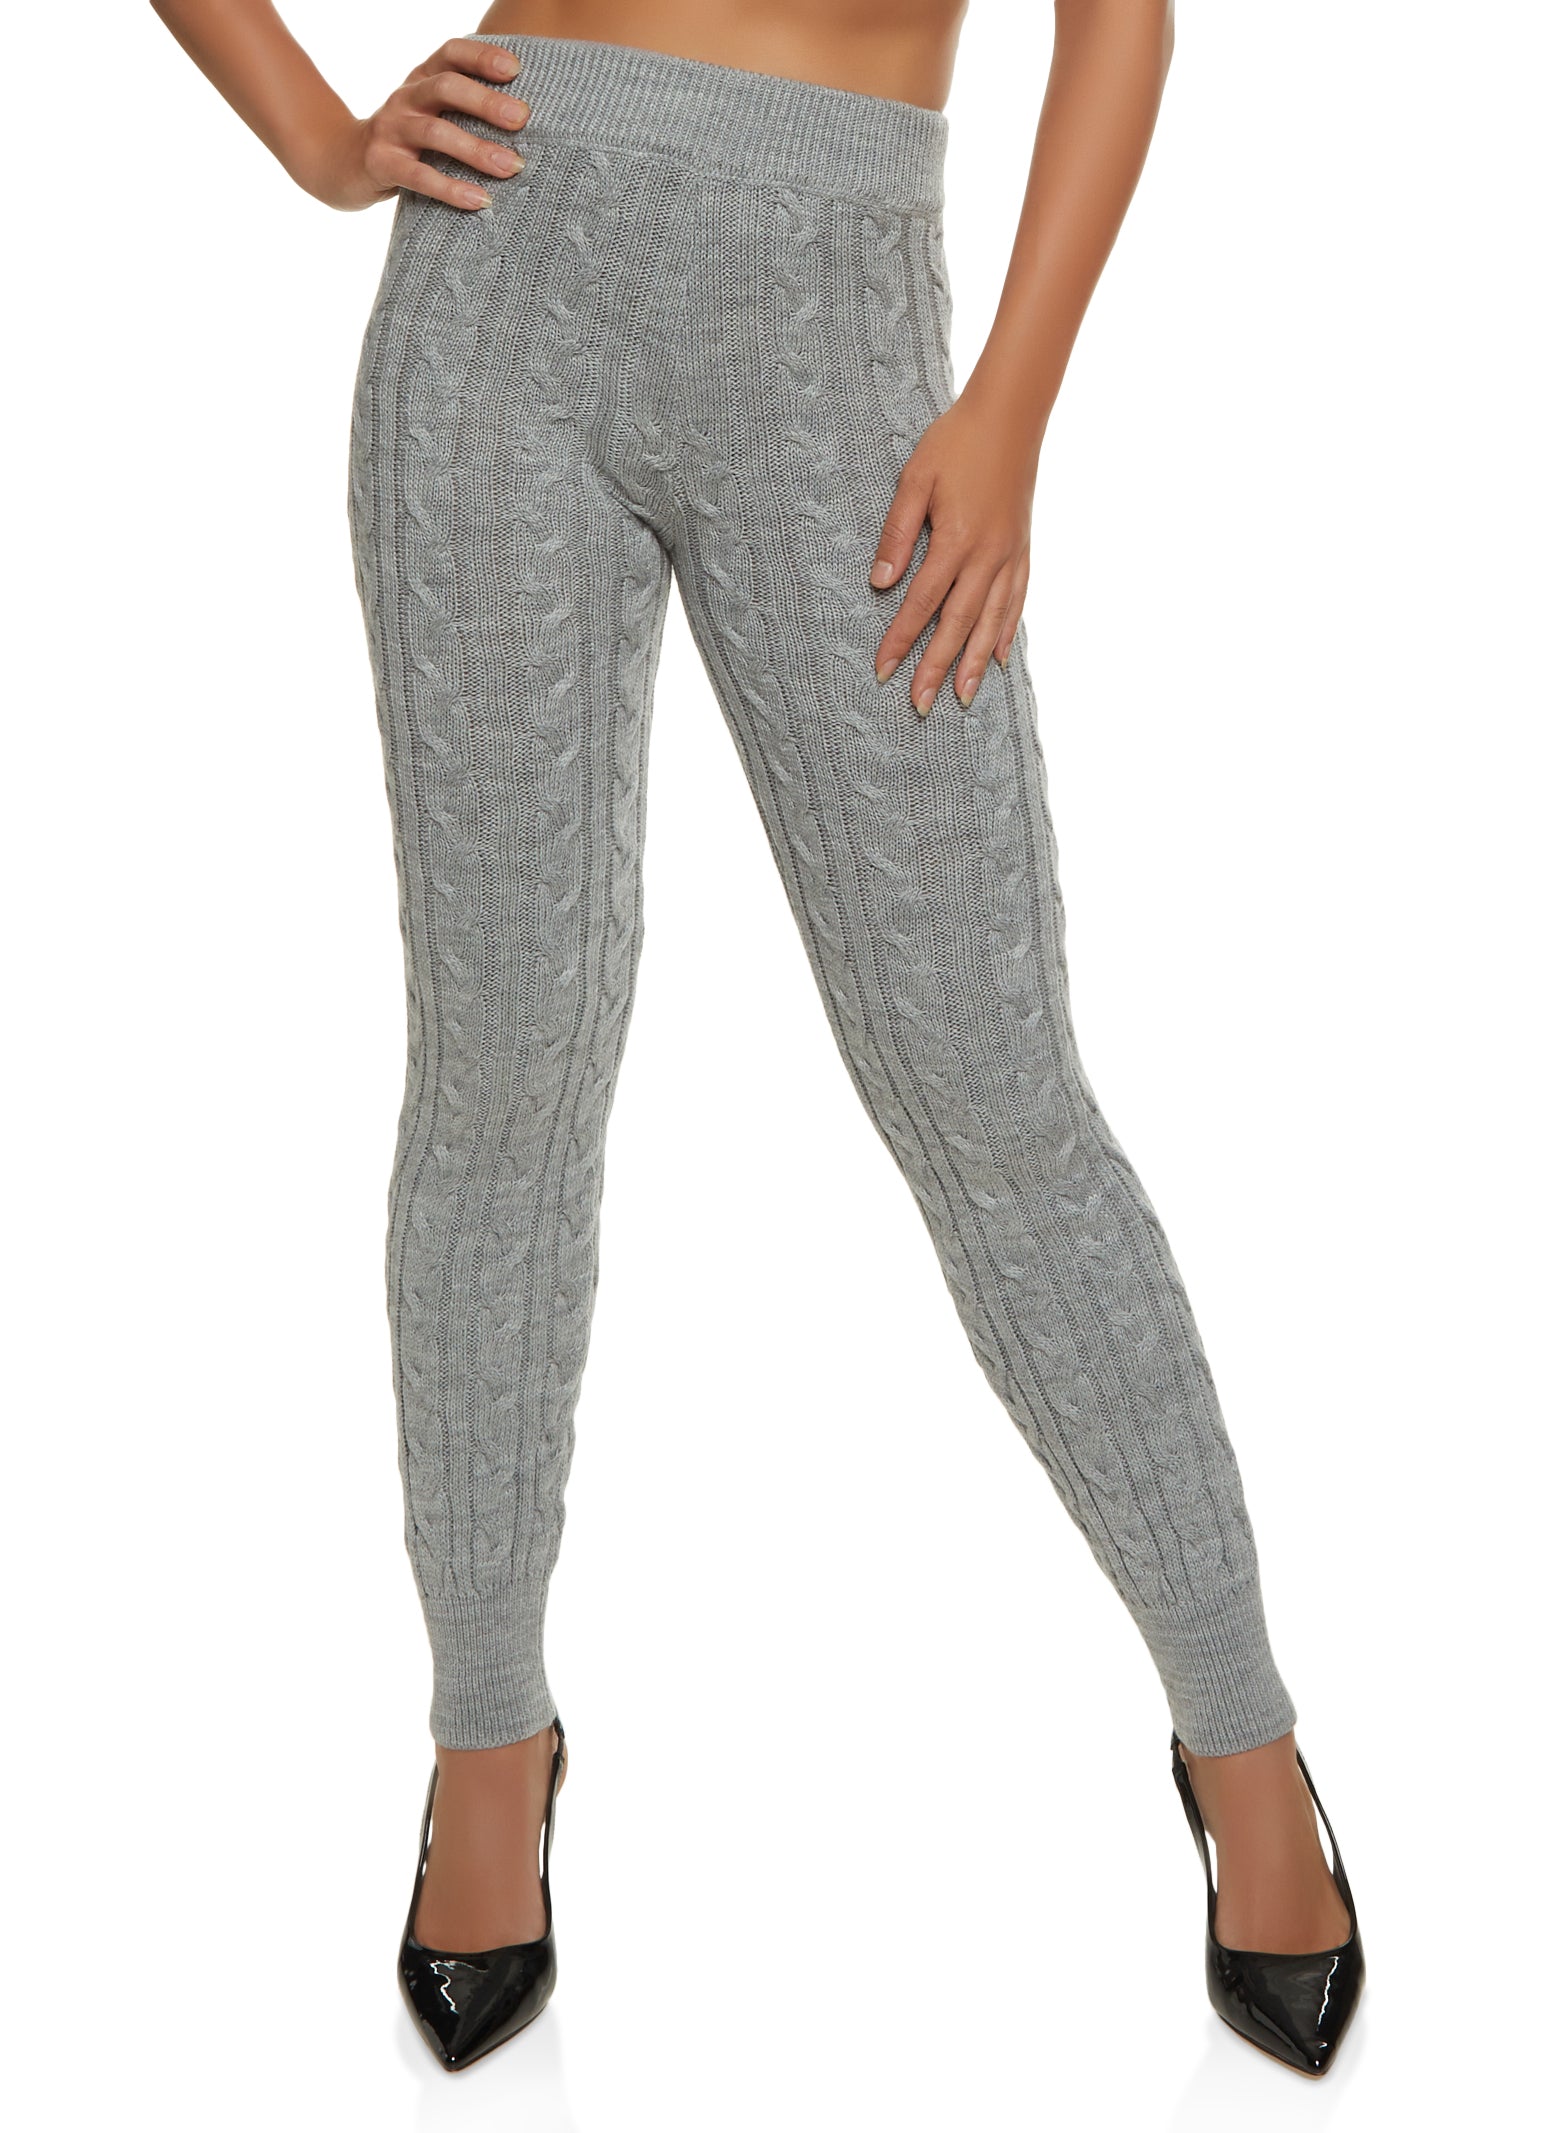 Lands' End Women's Tall Sport Knit High Rise Corduroy Leggings - Large Tall  - Charcoal Heather